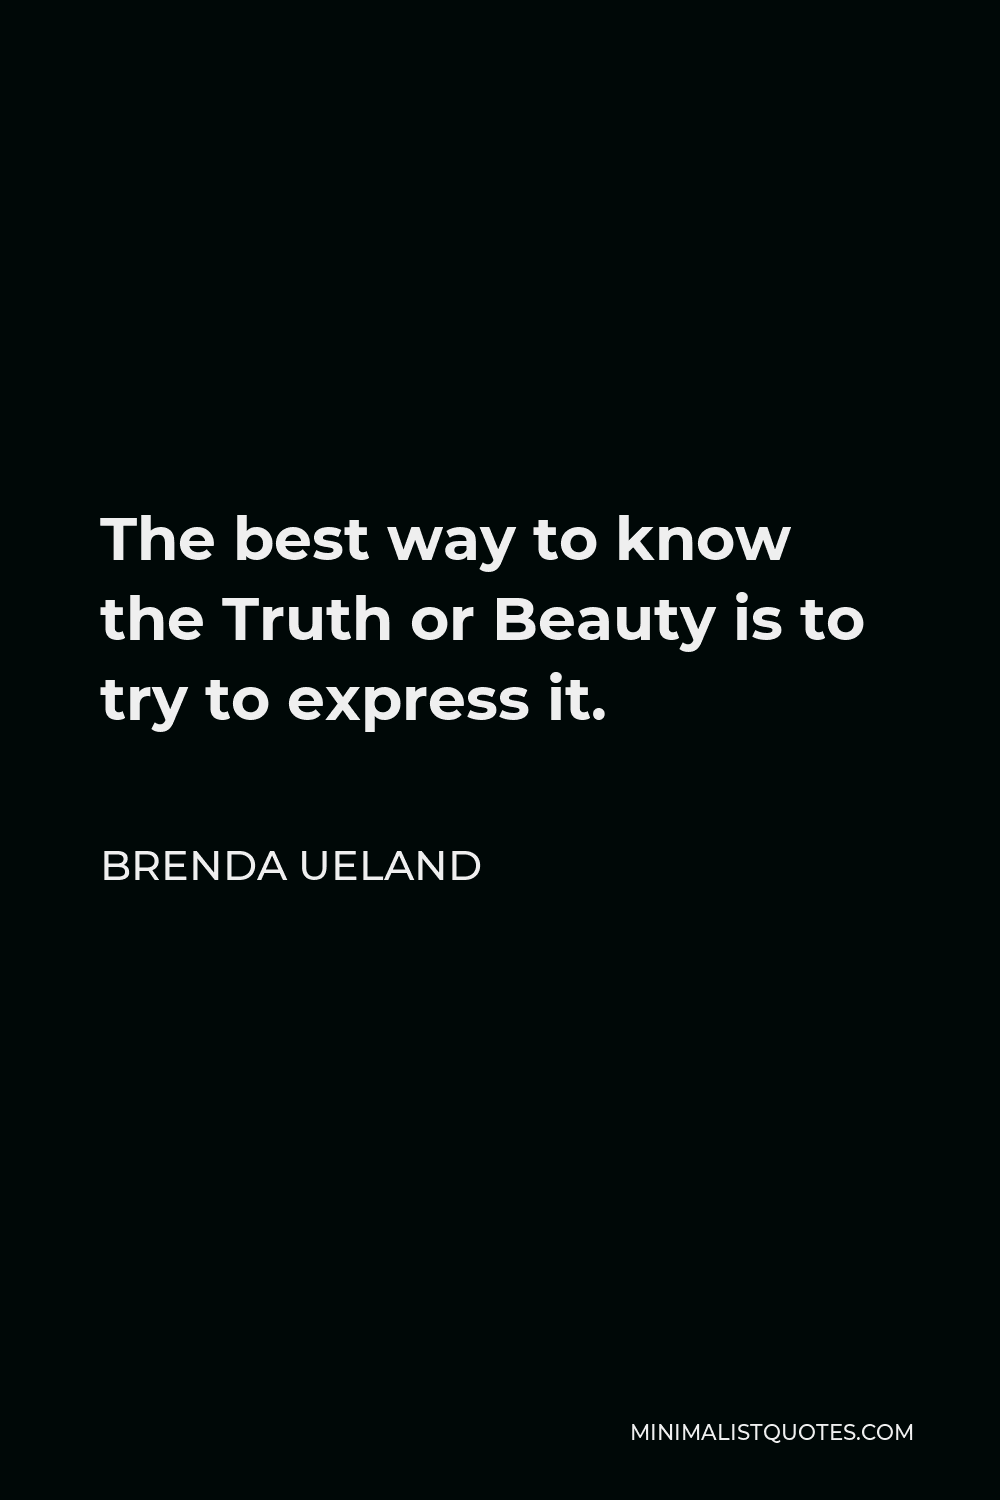 Brenda Ueland Quote - The best way to know the Truth or Beauty is to try to express it.